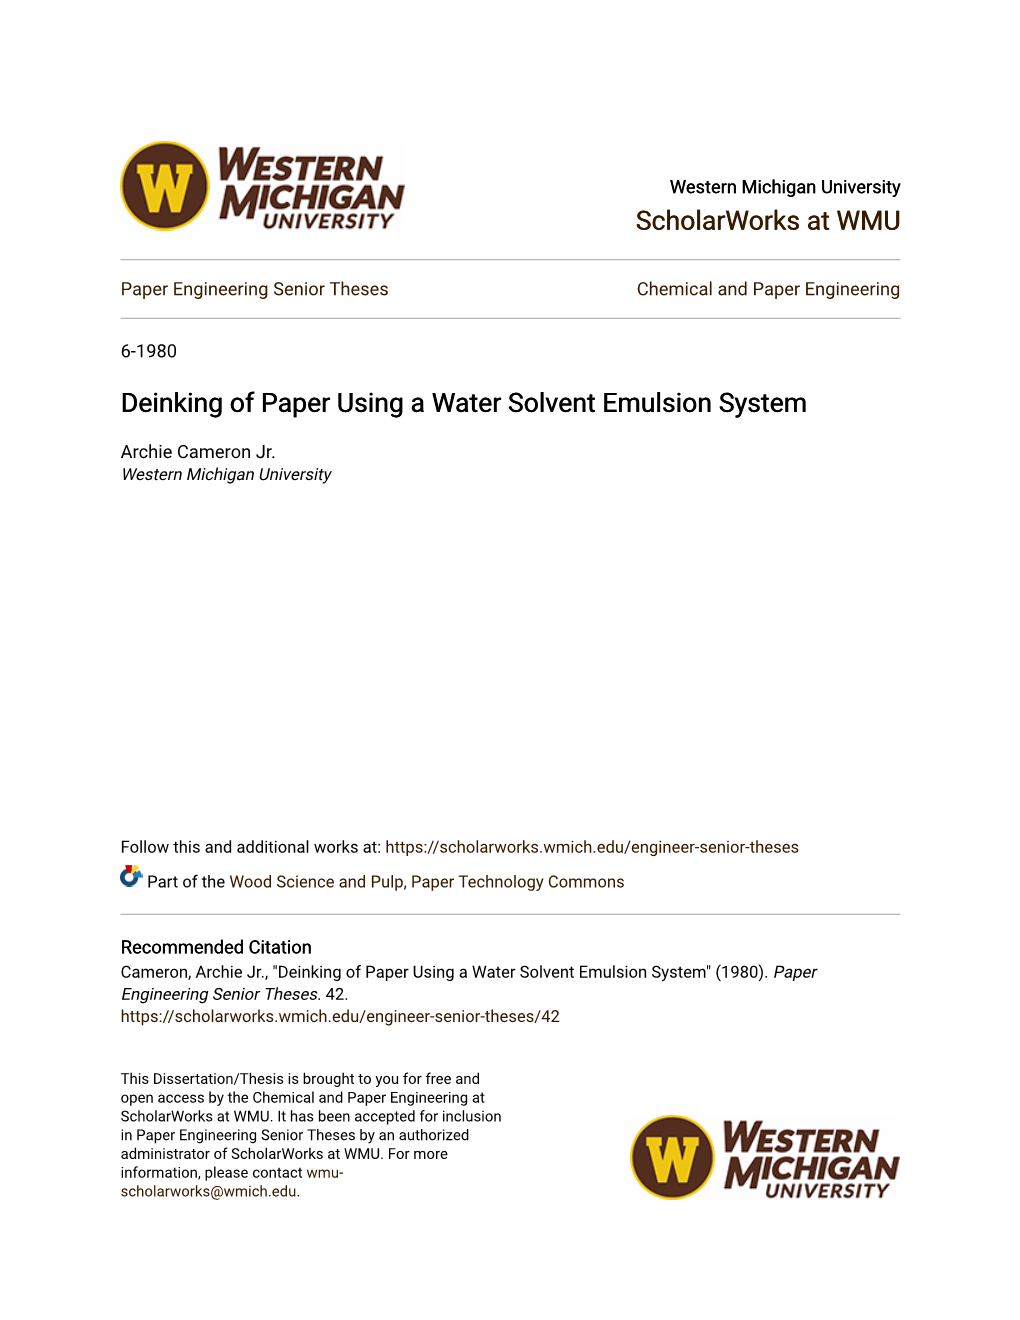 Deinking of Paper Using a Water Solvent Emulsion System